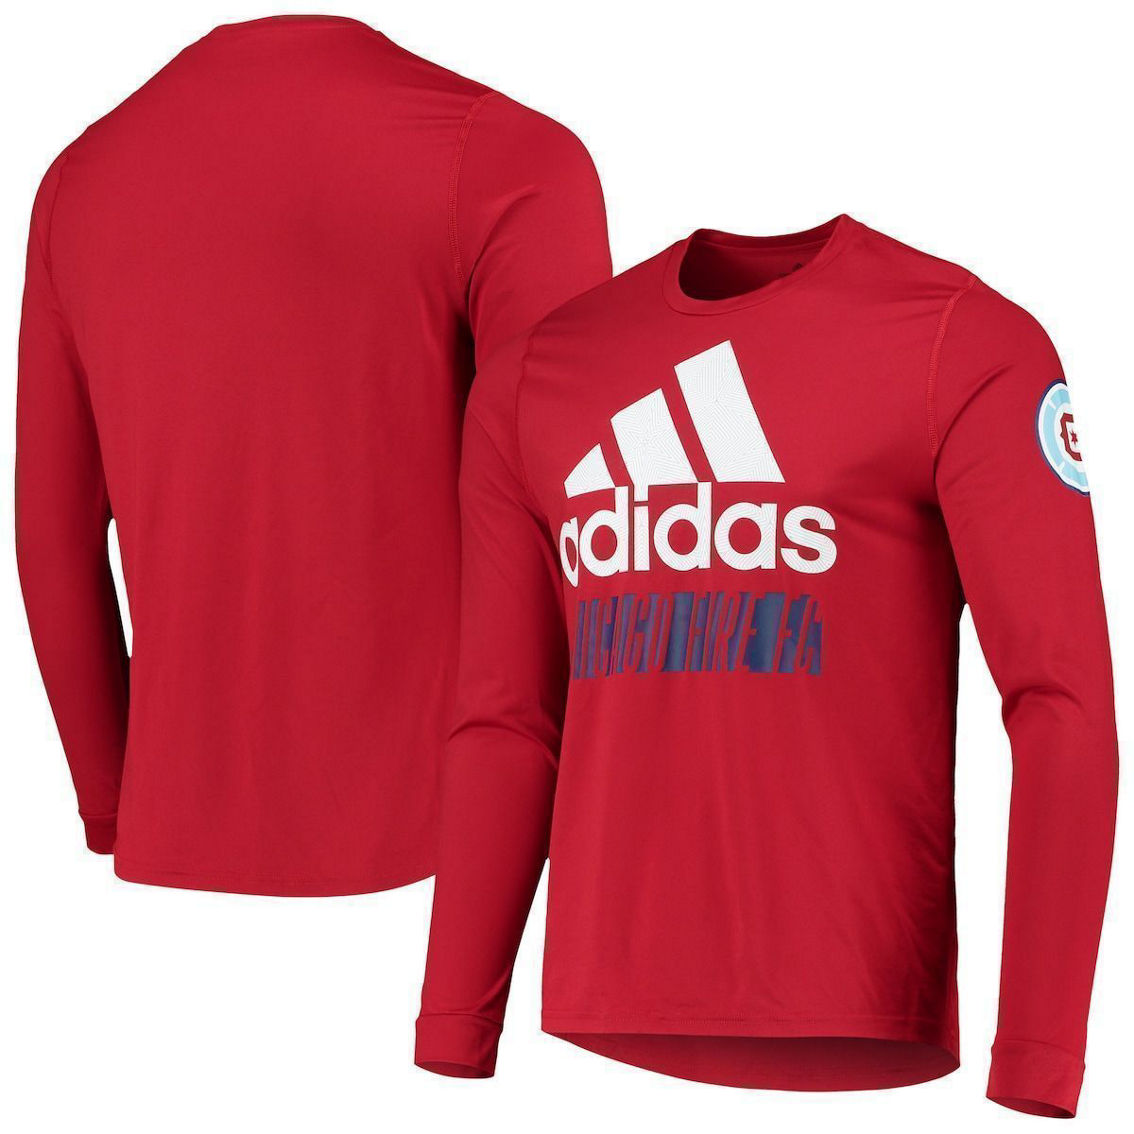 adidas Men's Red Chicago Fire Vintage Performance Long Sleeve T-Shirt - Image 2 of 4